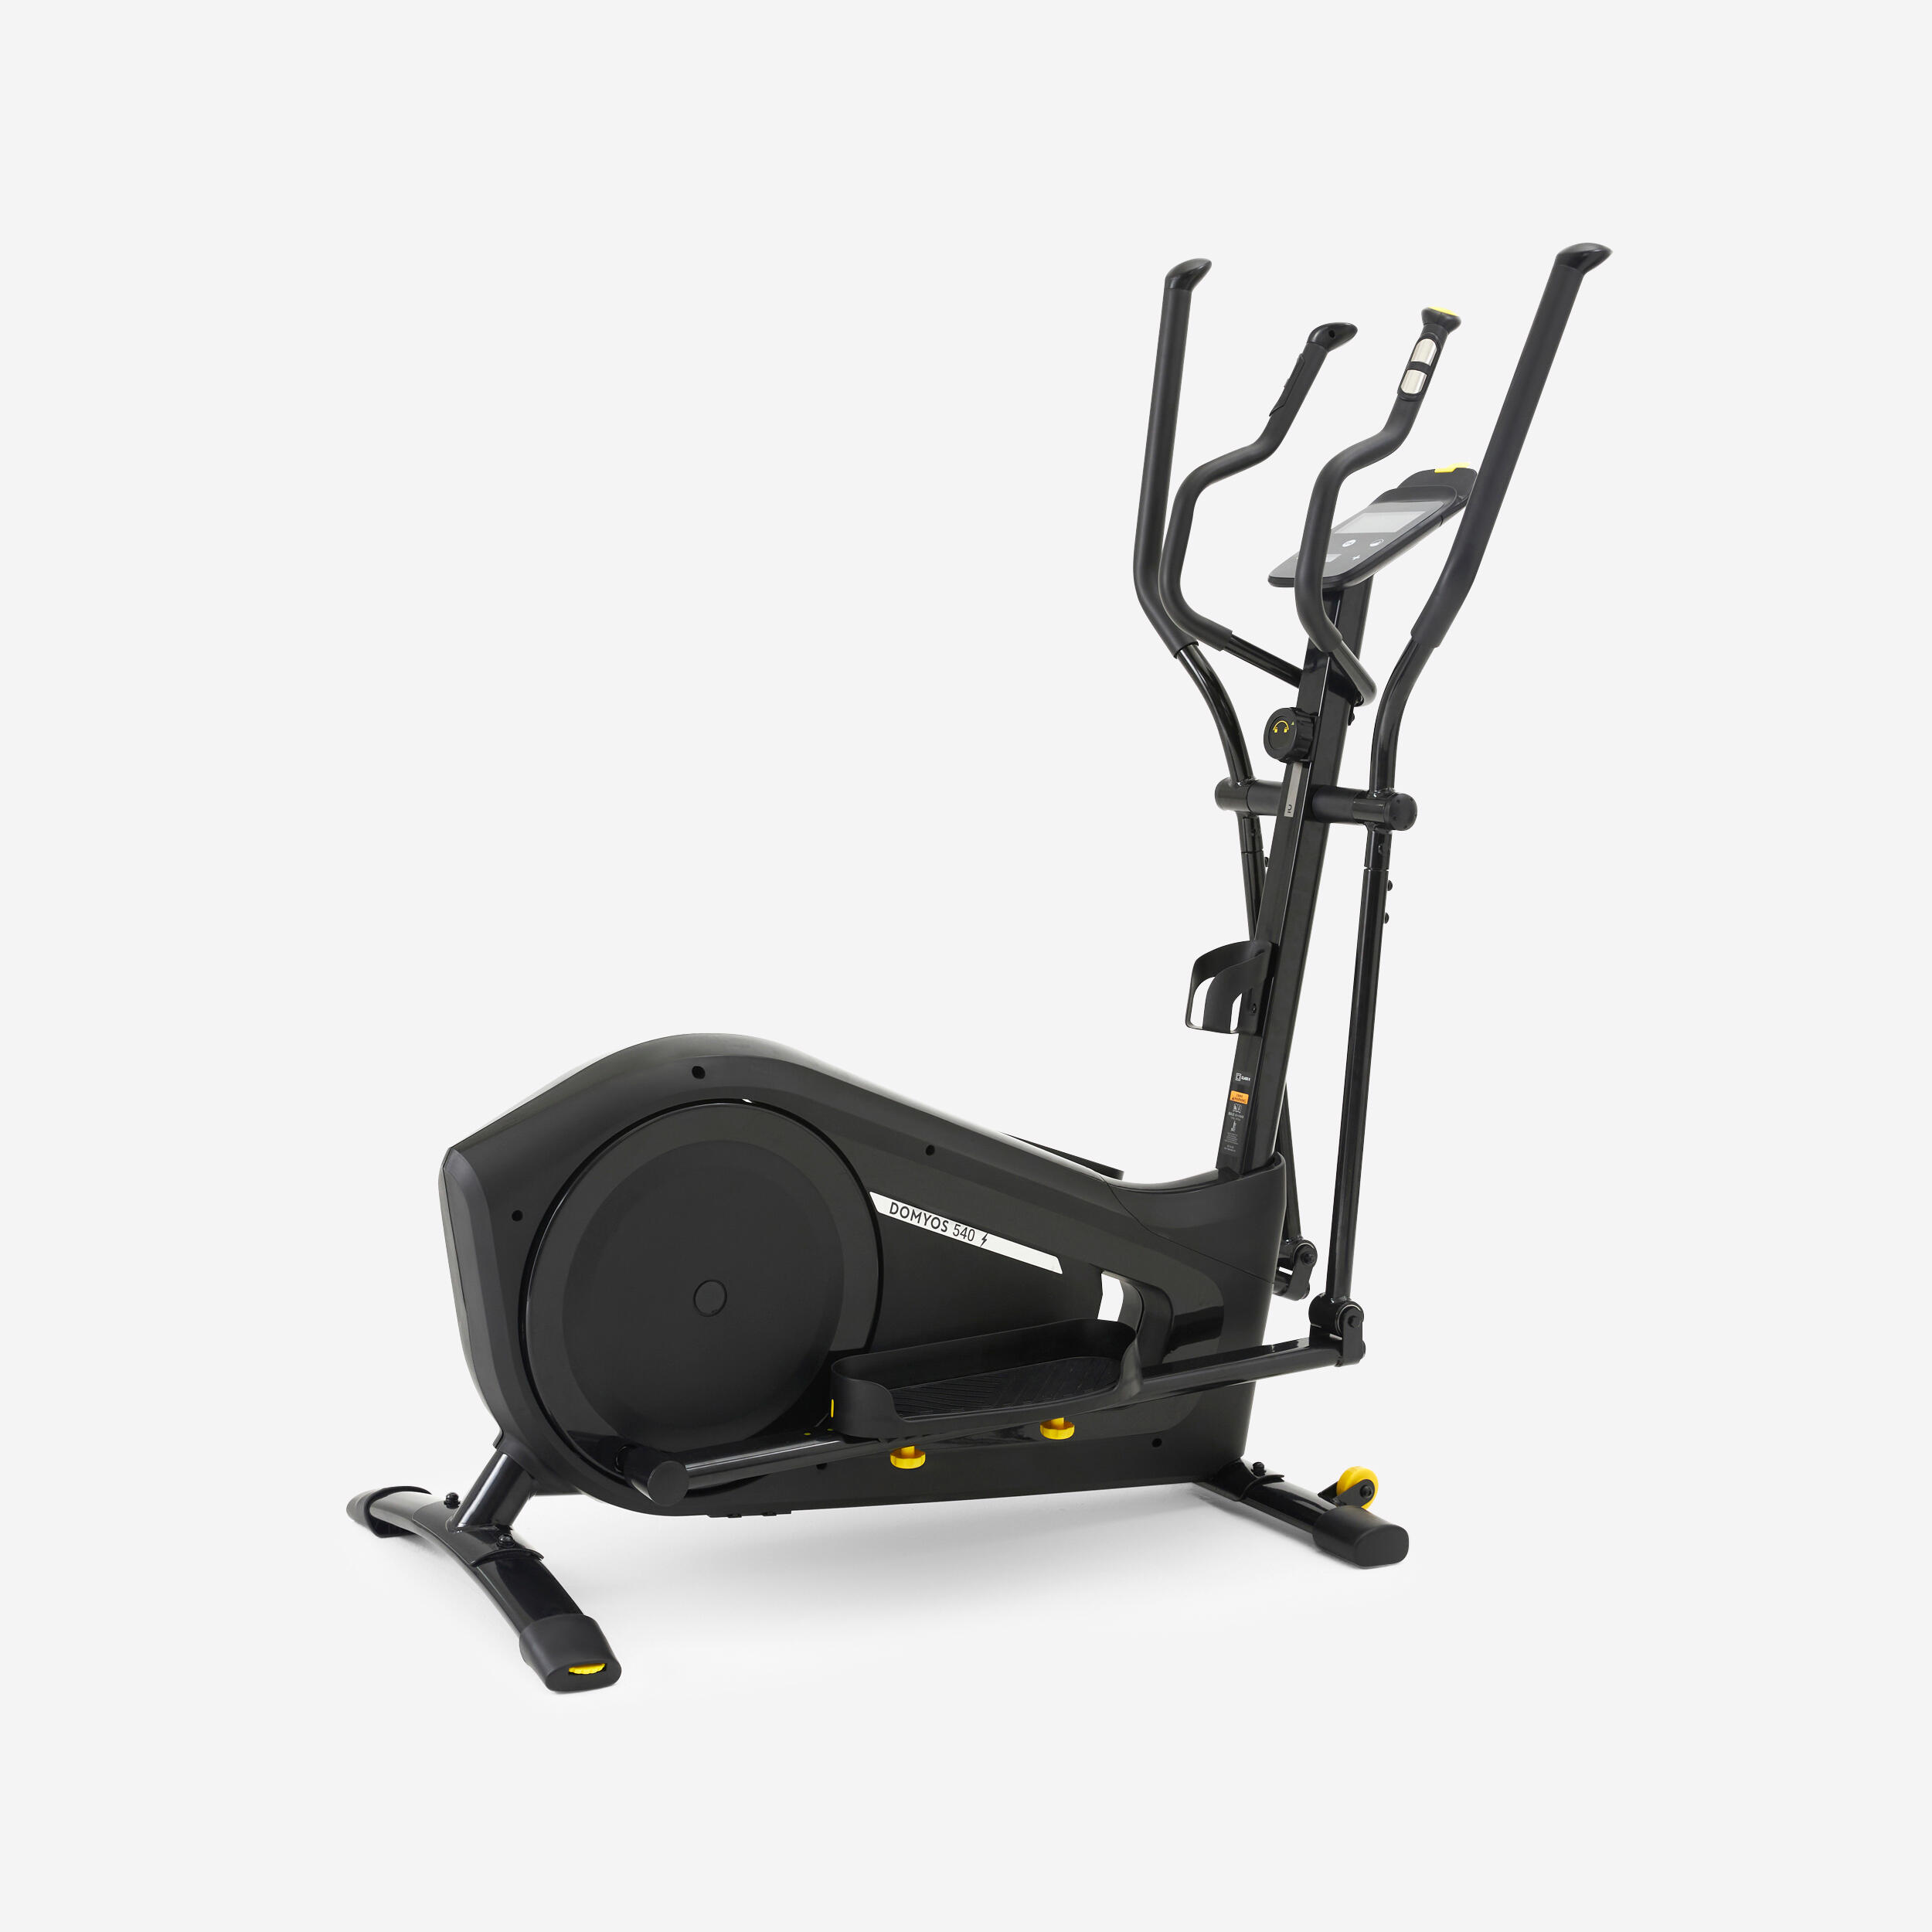 DOMYOS Self-Powered and Connected, E-Connected & Kinomap Compatible Cross Trainer EL540